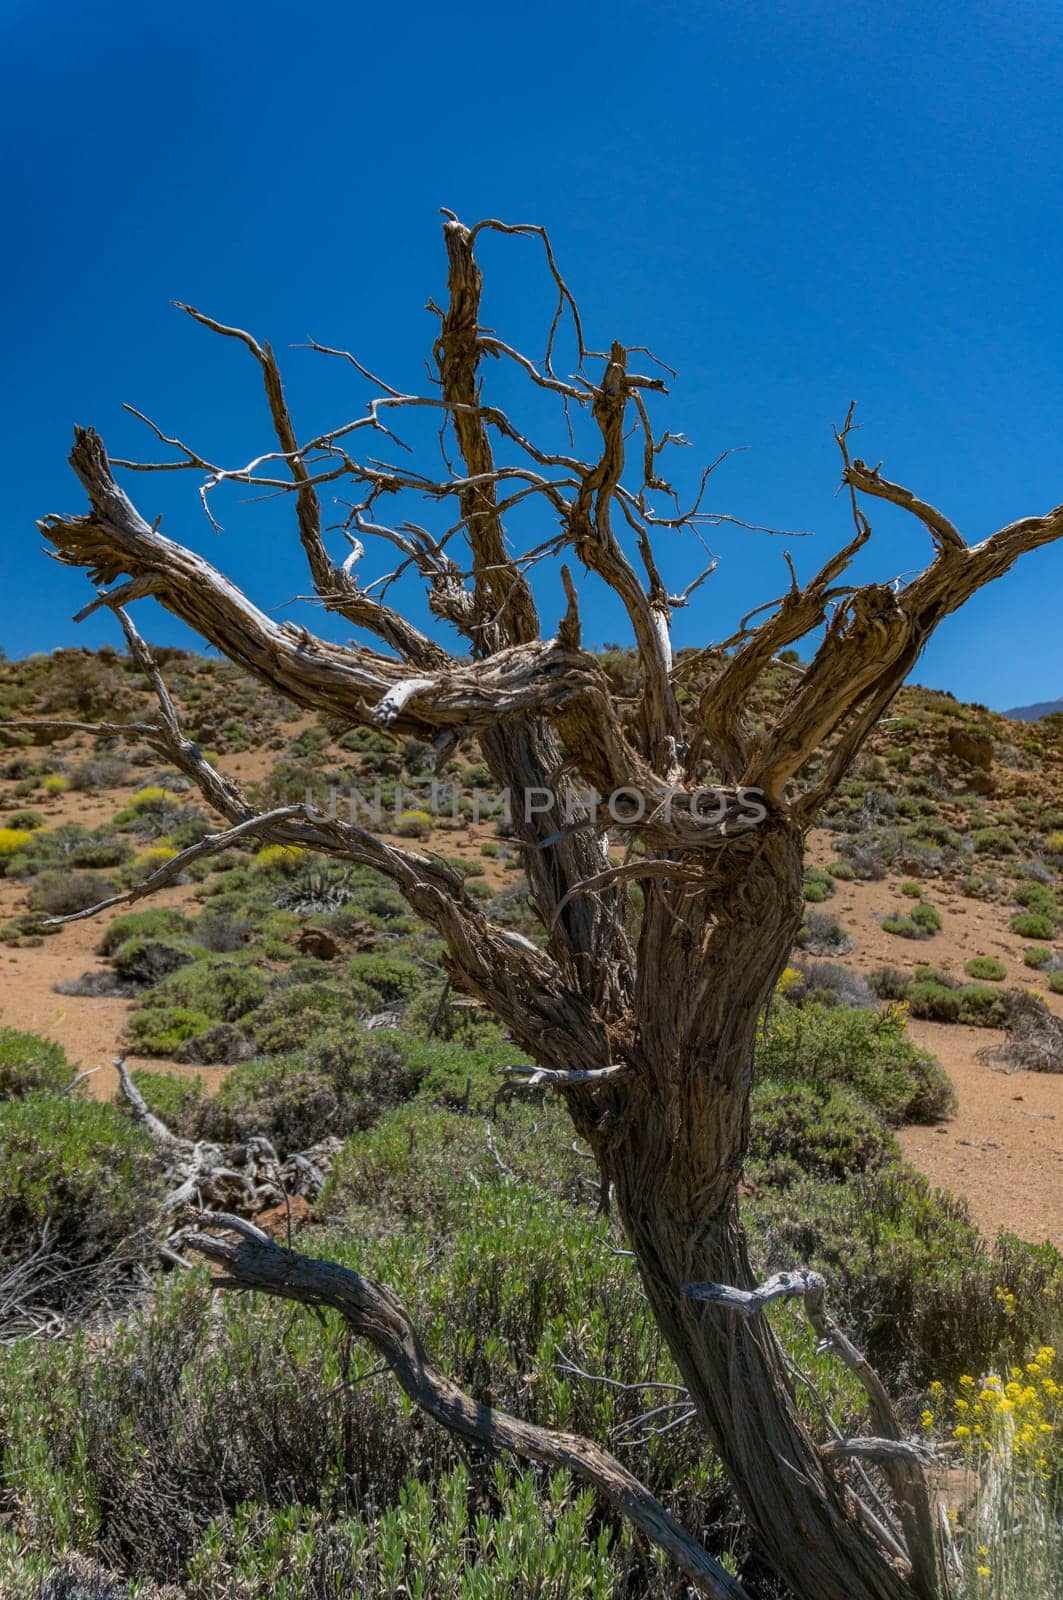 Dead tree with naked branches on blue sky background in a desert by amovitania